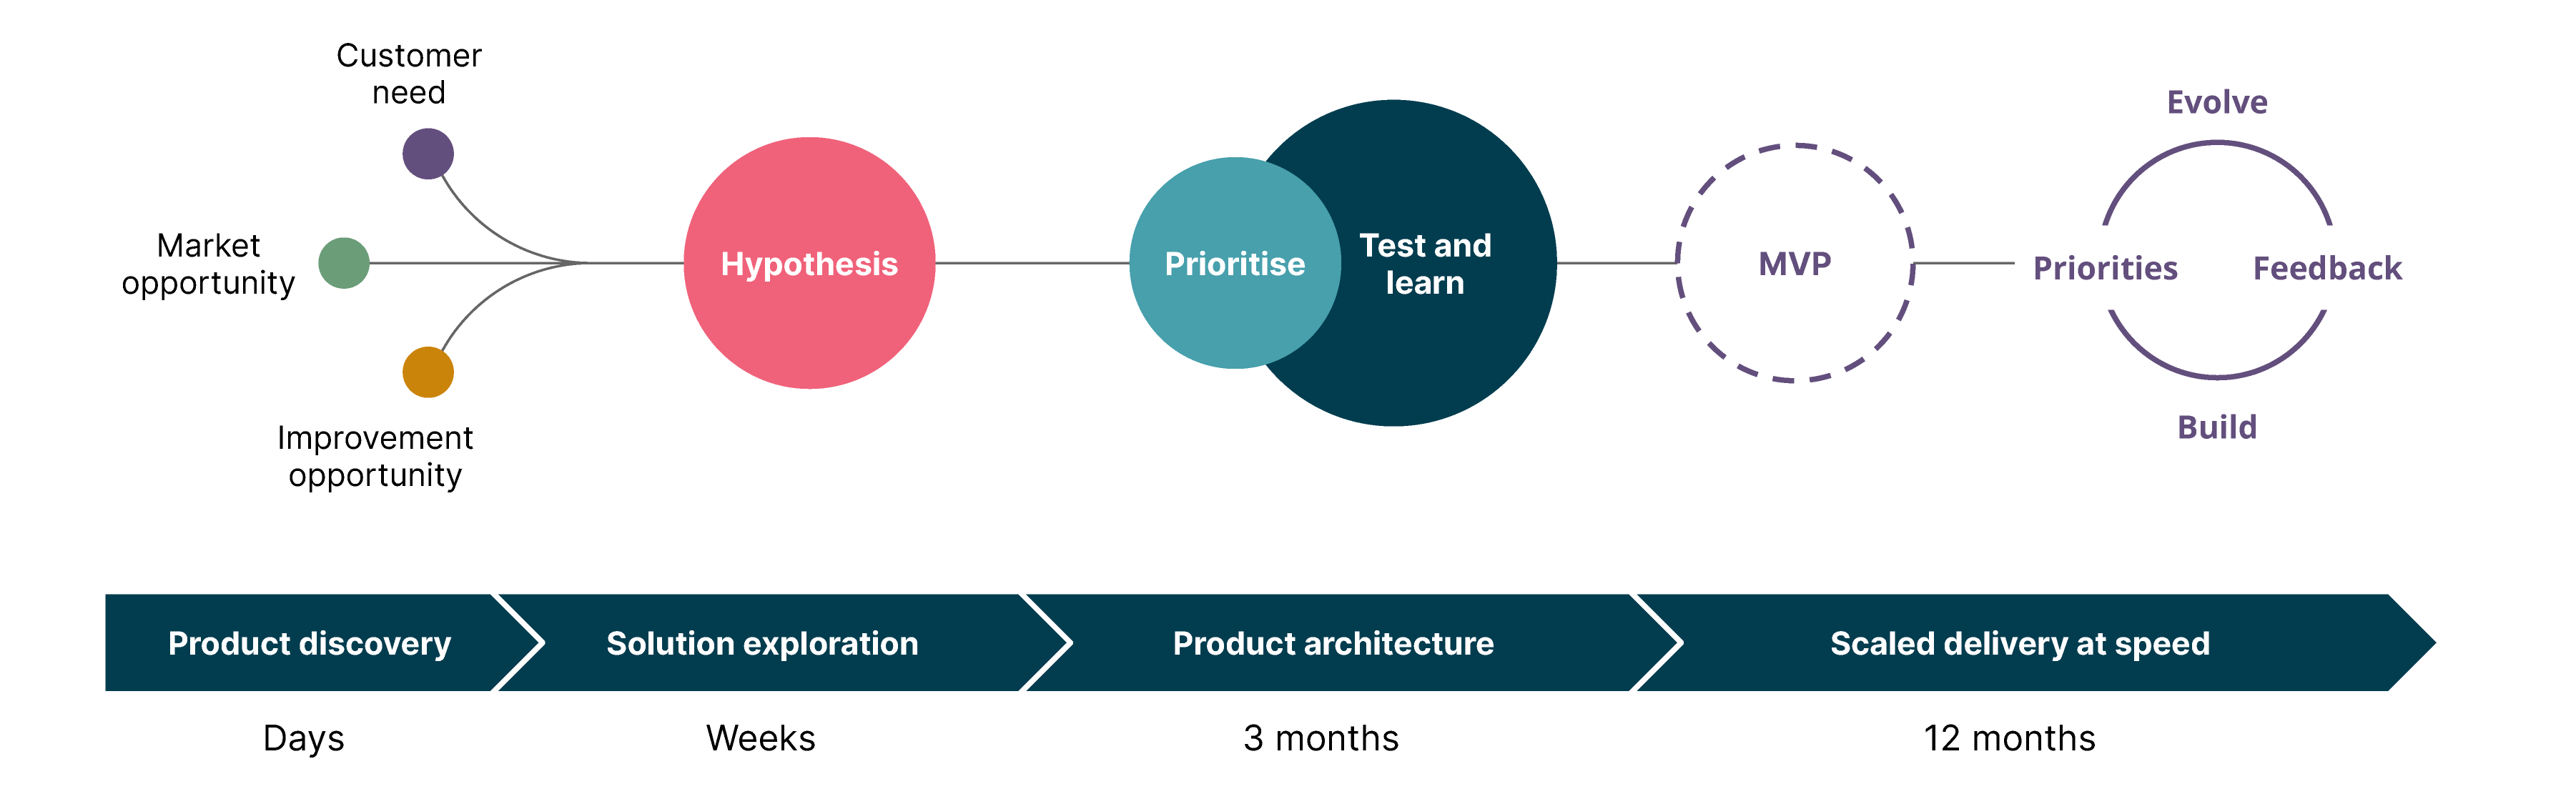 Four stages of product delivery 1) Product Discovery 2) Solution Exploration 3) Project architecture 4) Scaled delivery at speed. Against these stages, diagram above shows the different activities that happen at each stage including understanding customer need, market opportunity, improvement opportunity; developing the hypothesis; prioritising and testing and learning; creating the MVP then repeating the build, measure, learn process.